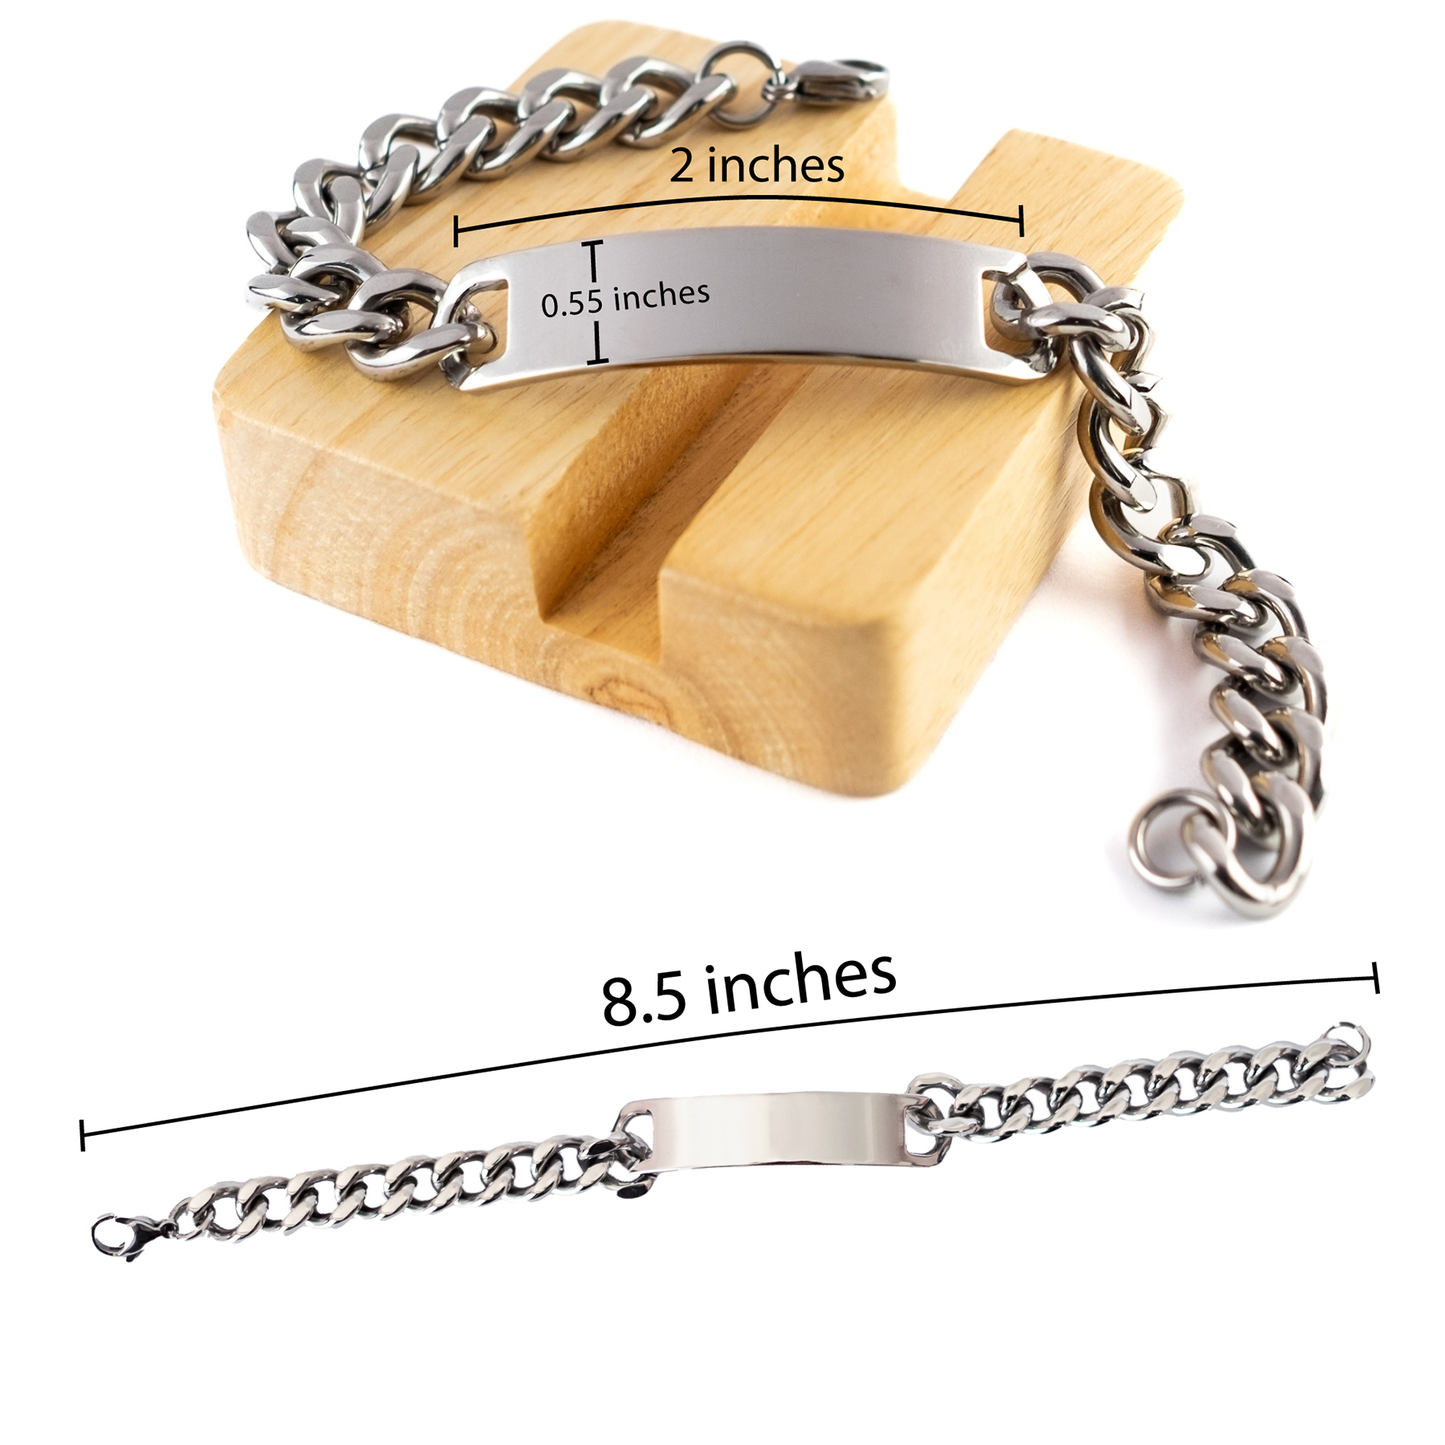 Stainless Steel Godmum Bracelet - Perfect love casteth out fear. 1 John 4:18 - Inspirational Jewelry for Mothers Day, Birthday, Christmas, and Graduation